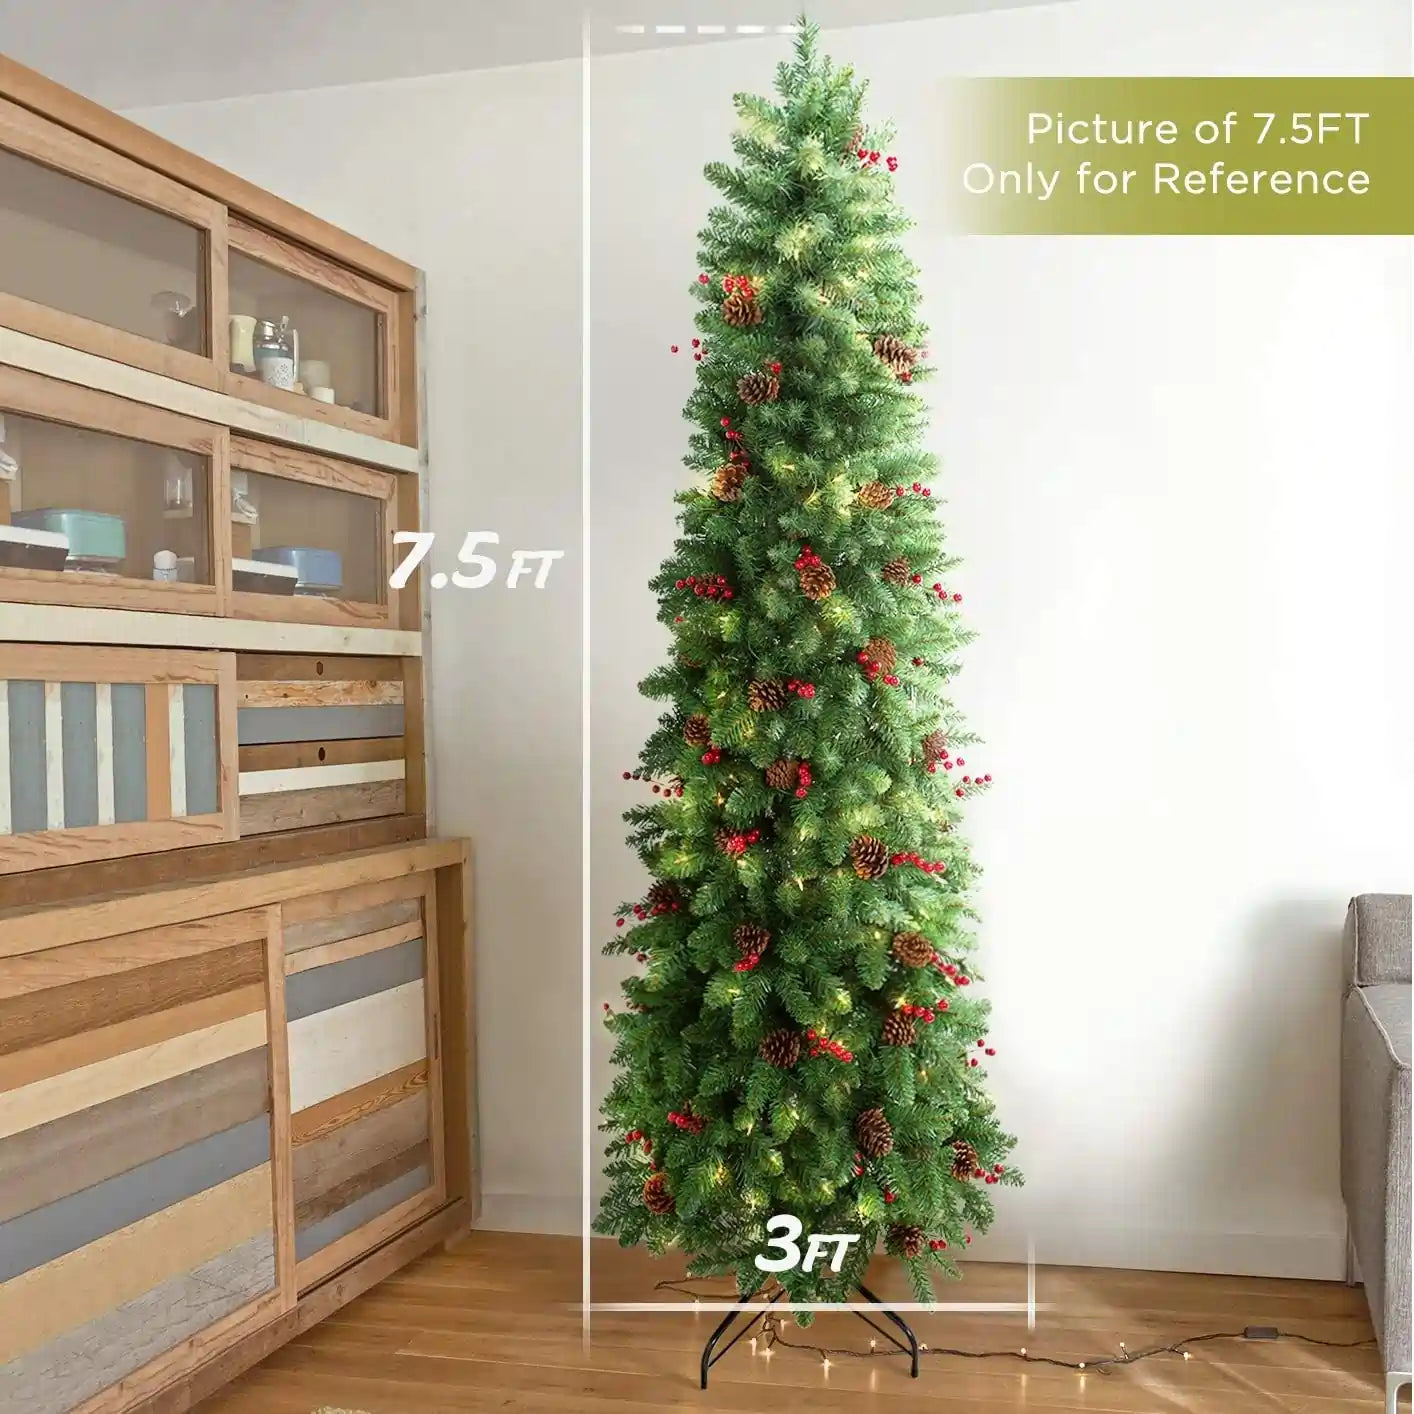 OasisCraft 7.5ft Pre-Lit Artificial Slim Christmas Tree Size#size_7.5FT